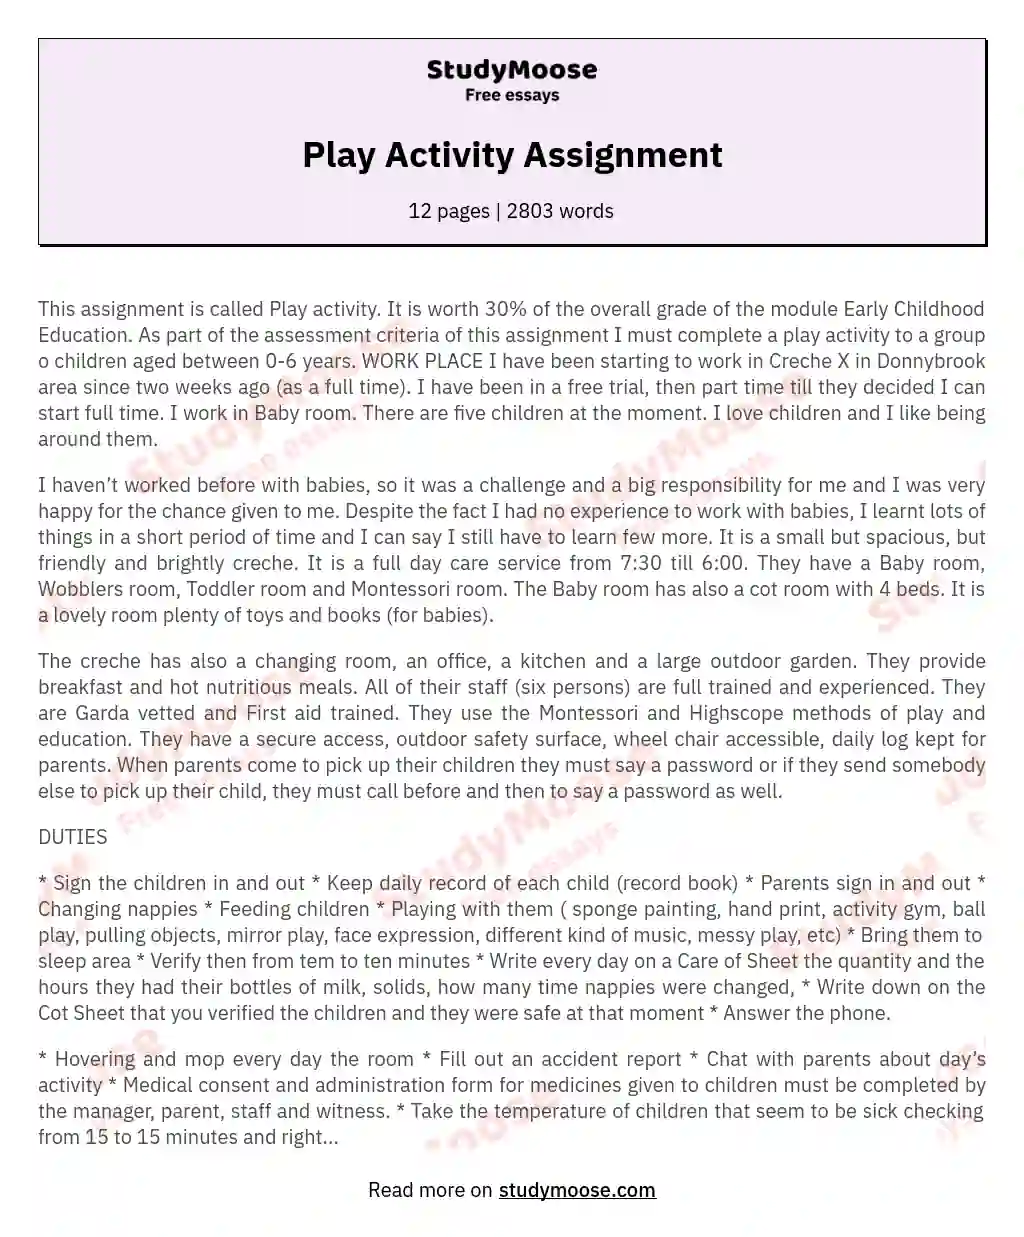 Play Activity Assignment essay